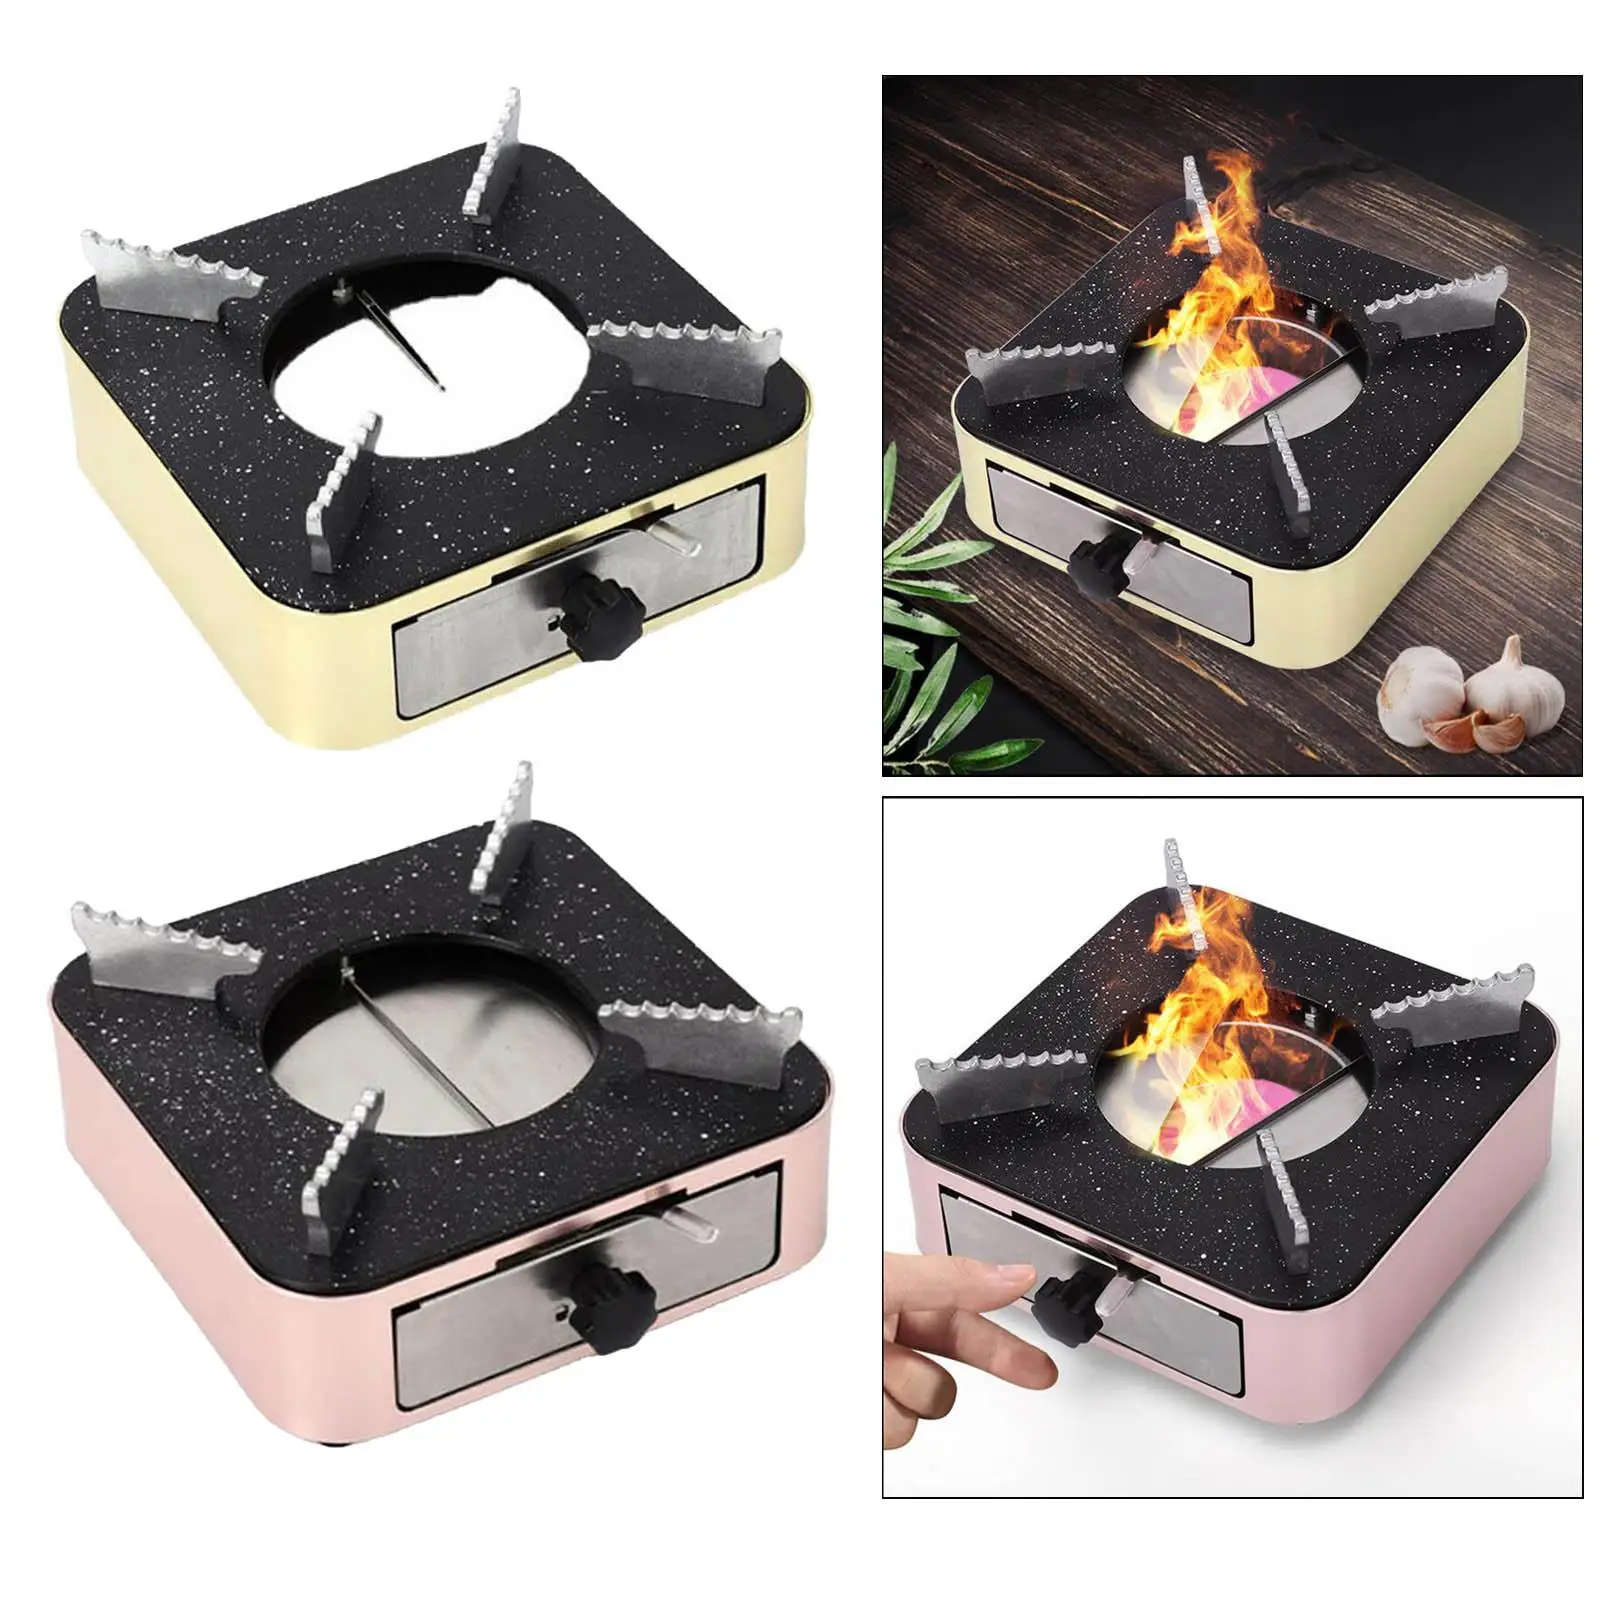  Stove Lightweight Furnace for Outdoor Camping Household Backpacking